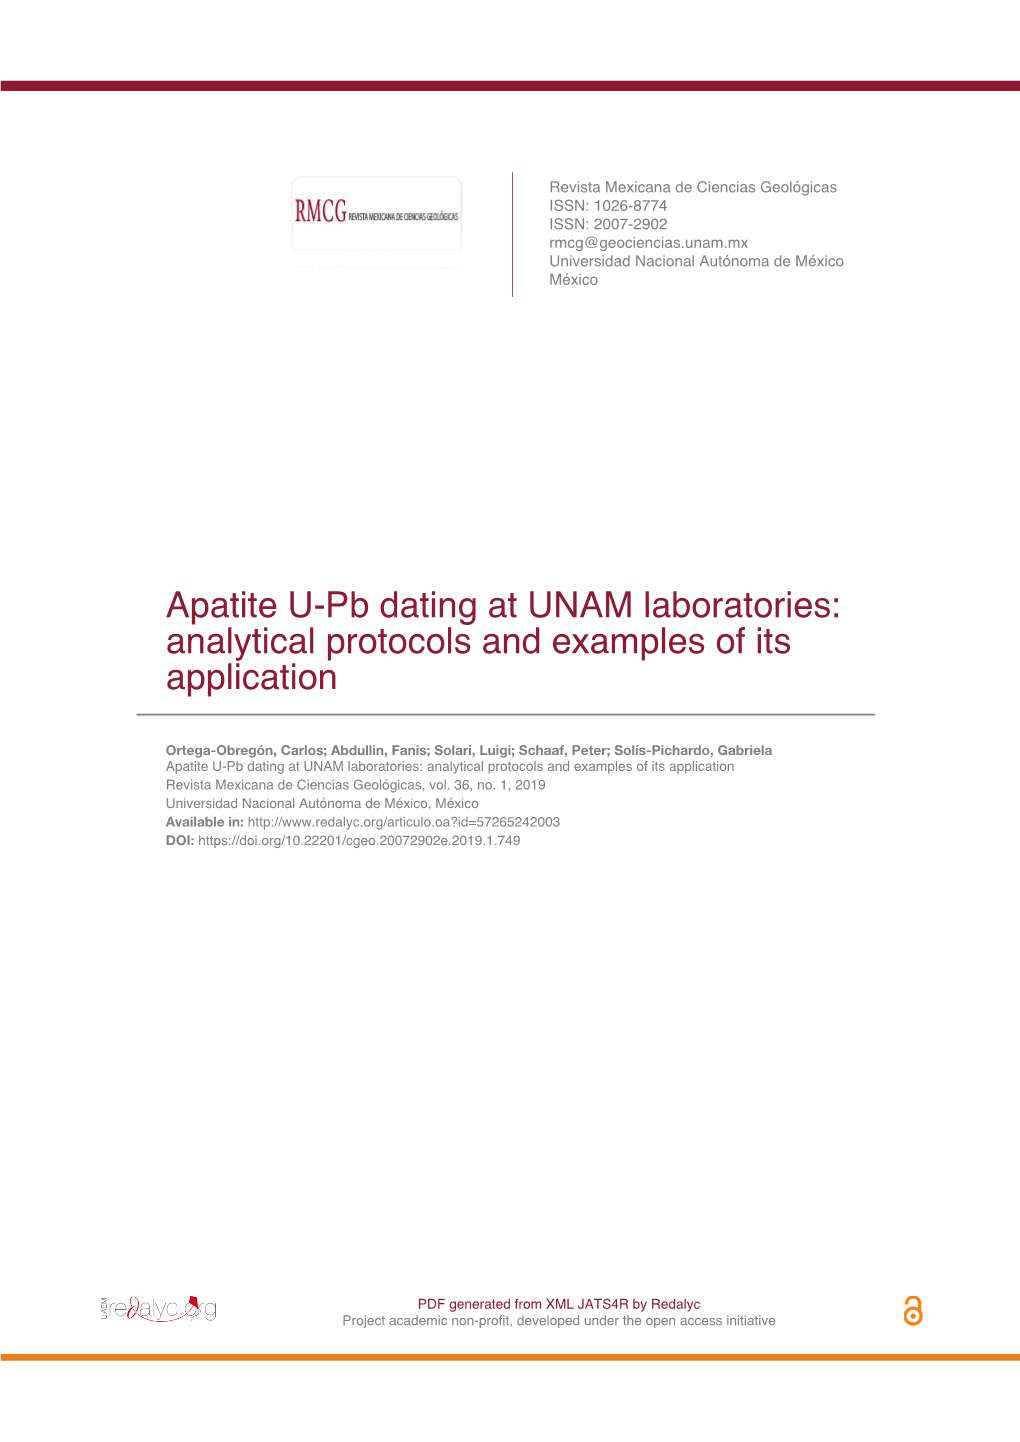 Apatite U-Pb Dating at UNAM Laboratories: Analytical Protocols and Examples of Its Application